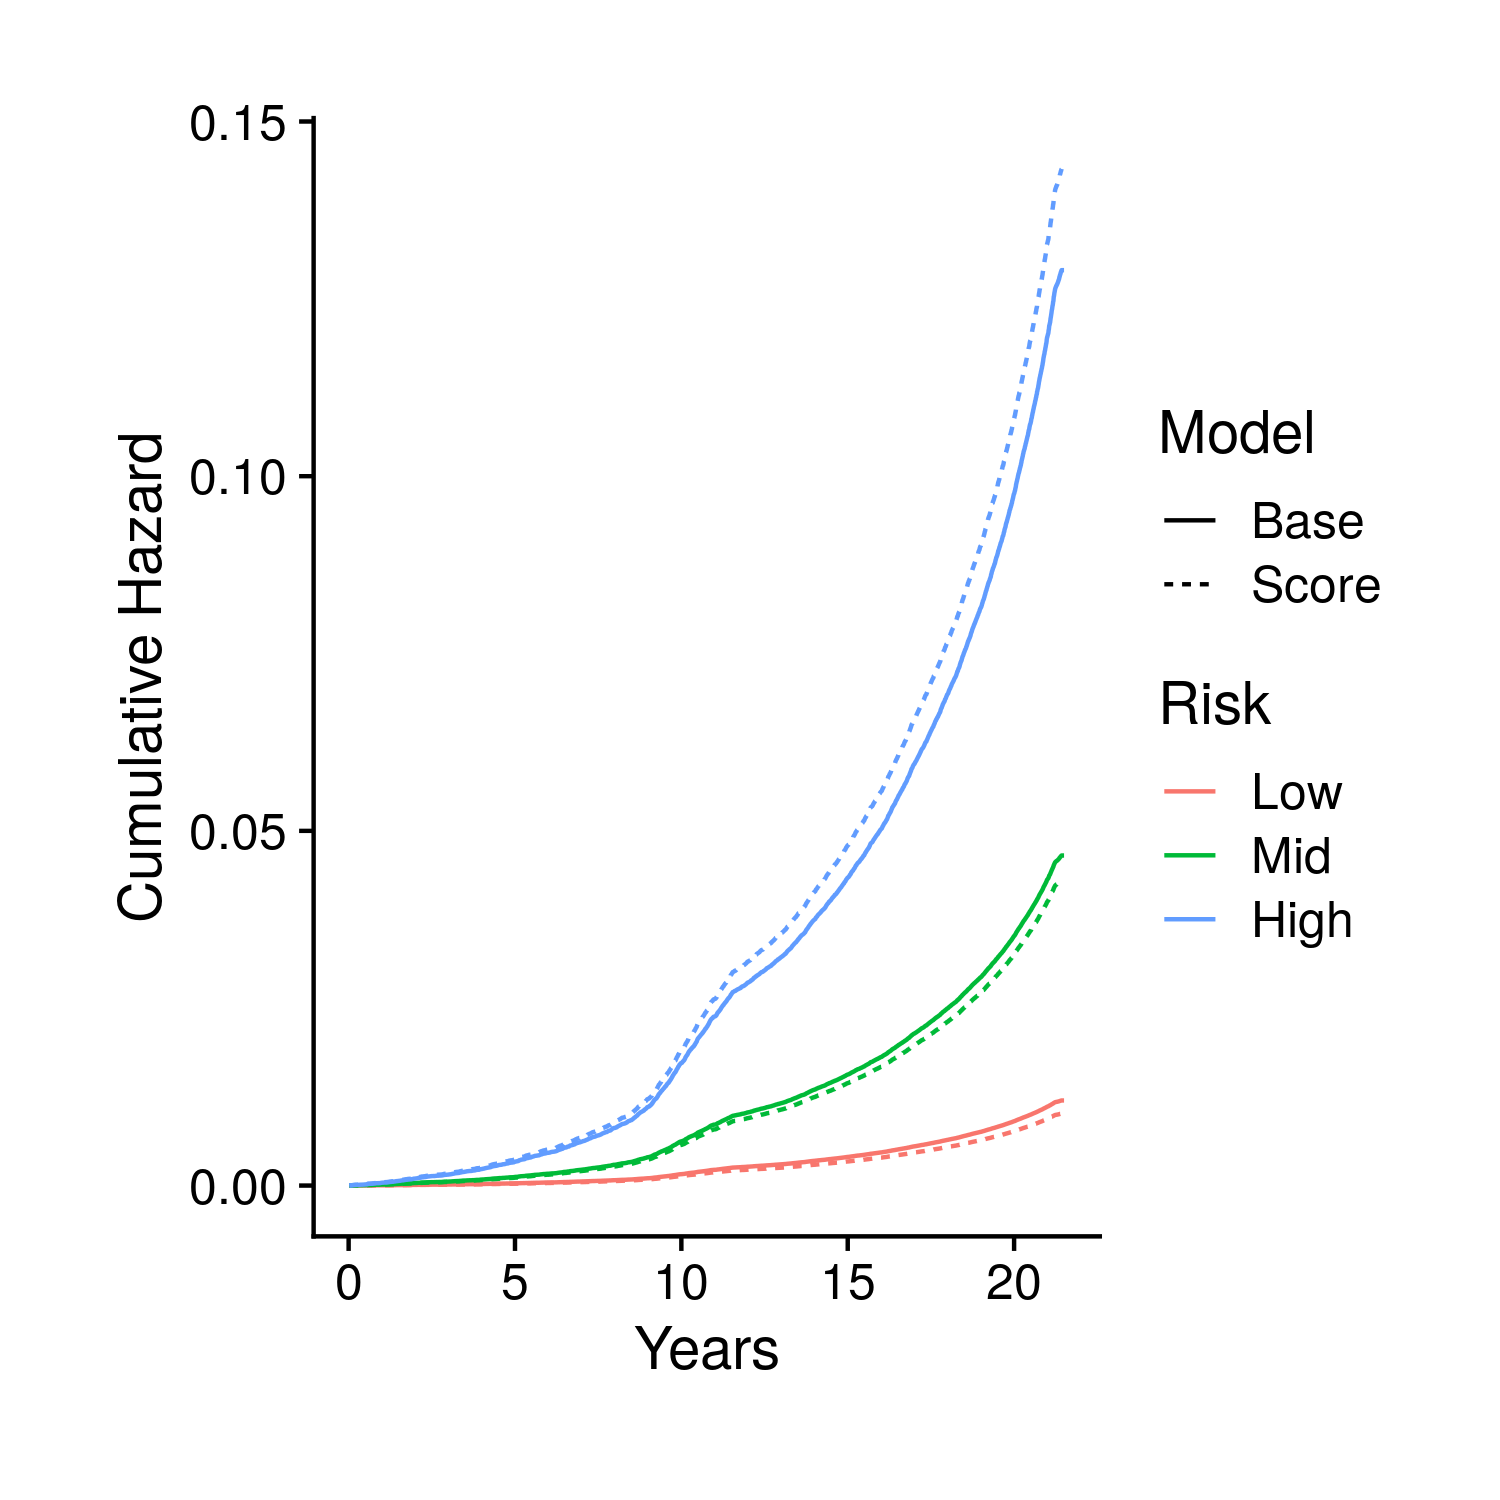 Kaplan-Meier style curves comparing groups stratified by polygenic risk score with two predictions, one that includes the score and one that does not, for each group